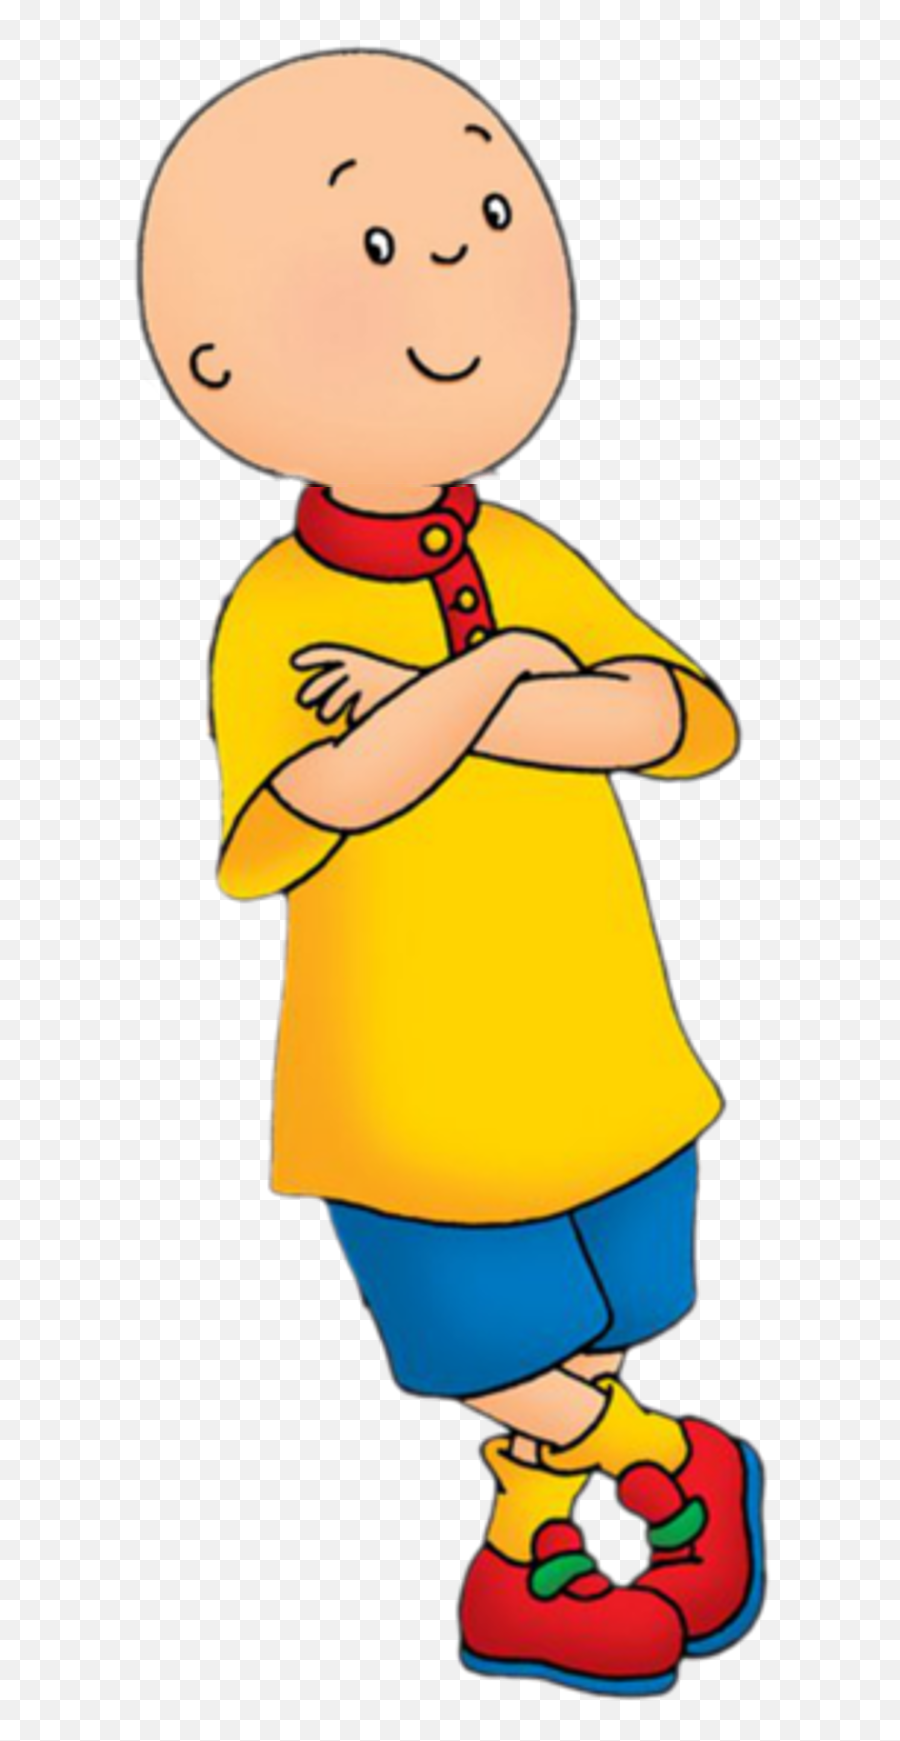 Caillou Character - Loathsome Characters Wiki Caillou Cartoon Emoji,Old Children's Cartoon That Had Characters Based Off Of Emotions On Boomerang